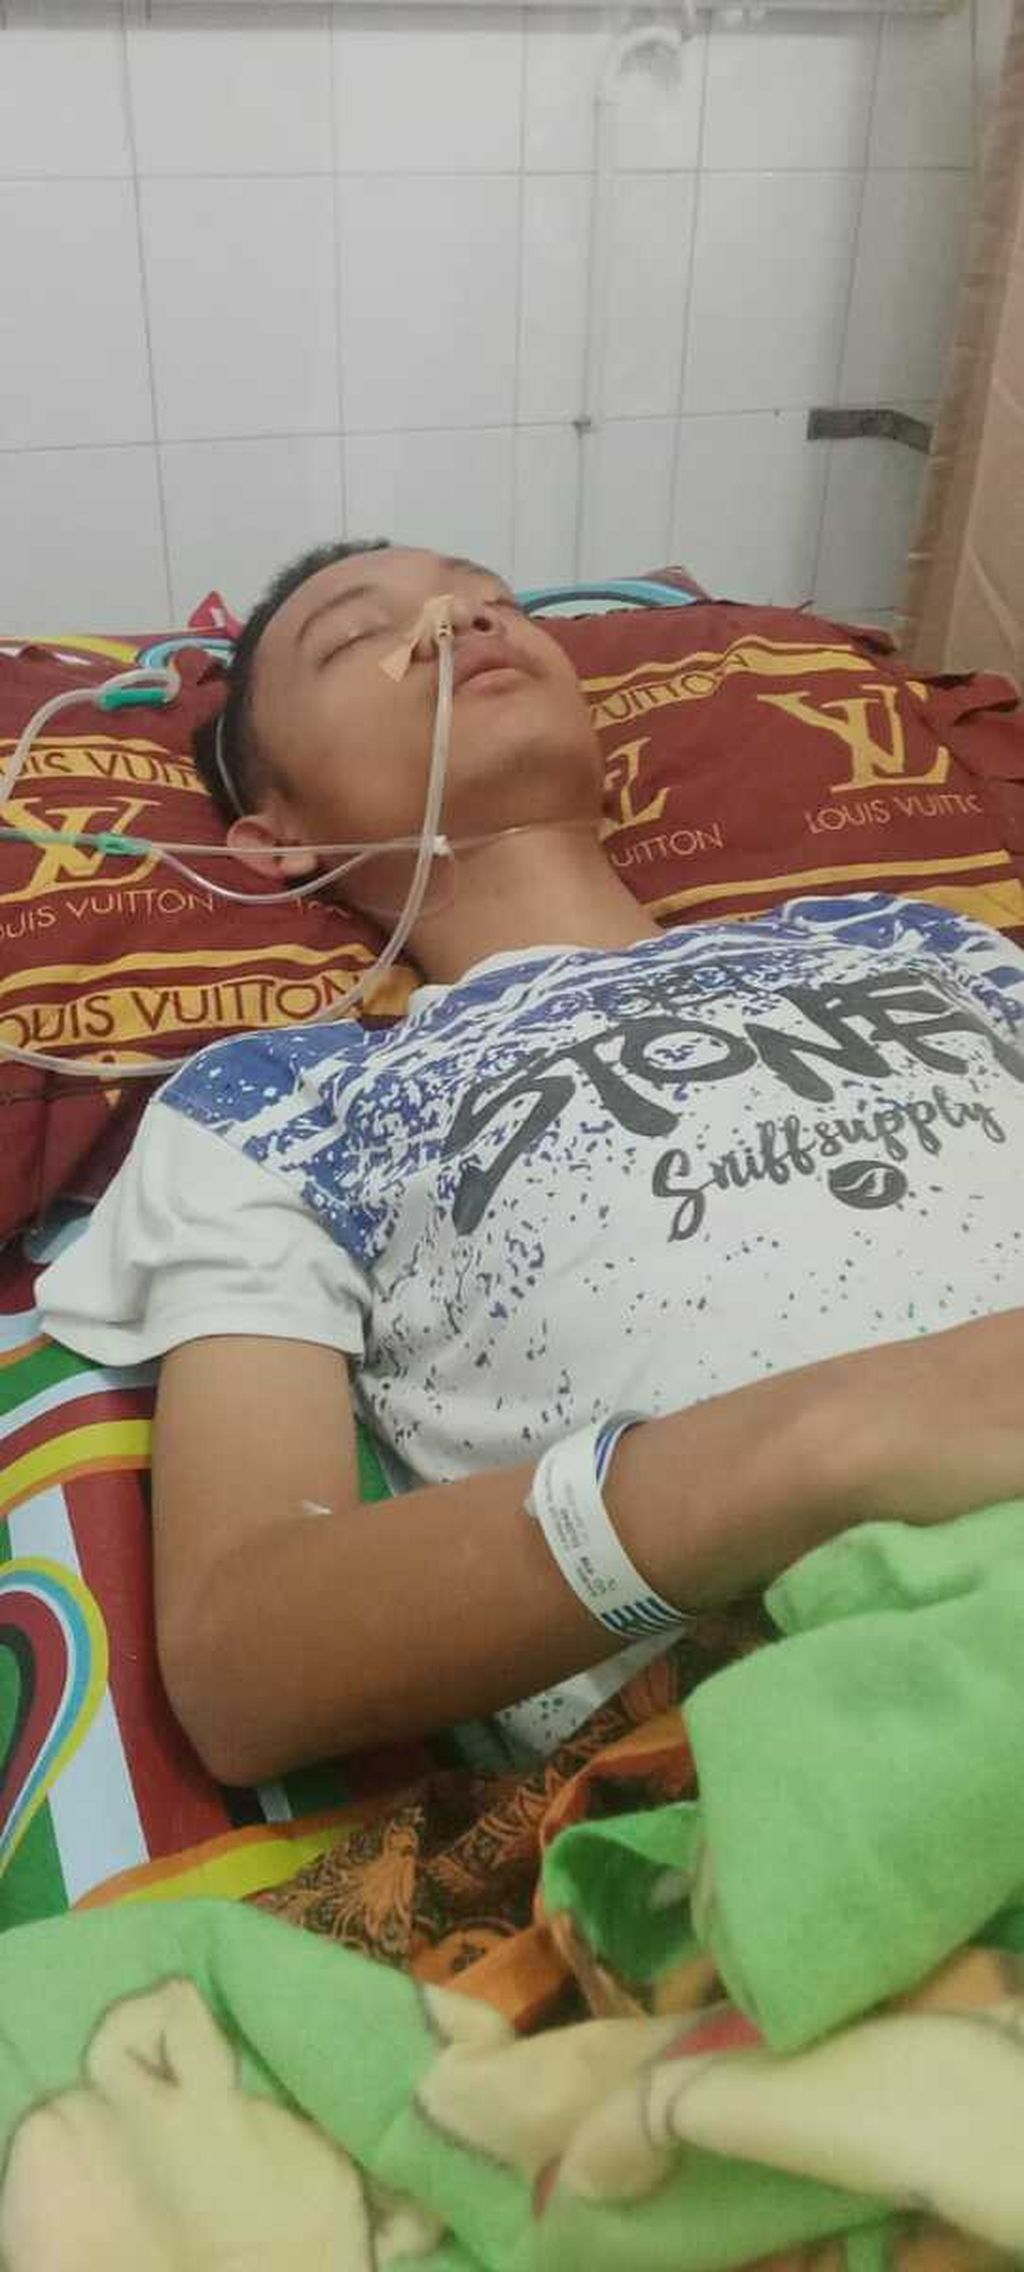 Yaredi Ndruru (17), a student from South Nias, was hospitalized and eventually died after being punished by the school principal, who hit him on the head.